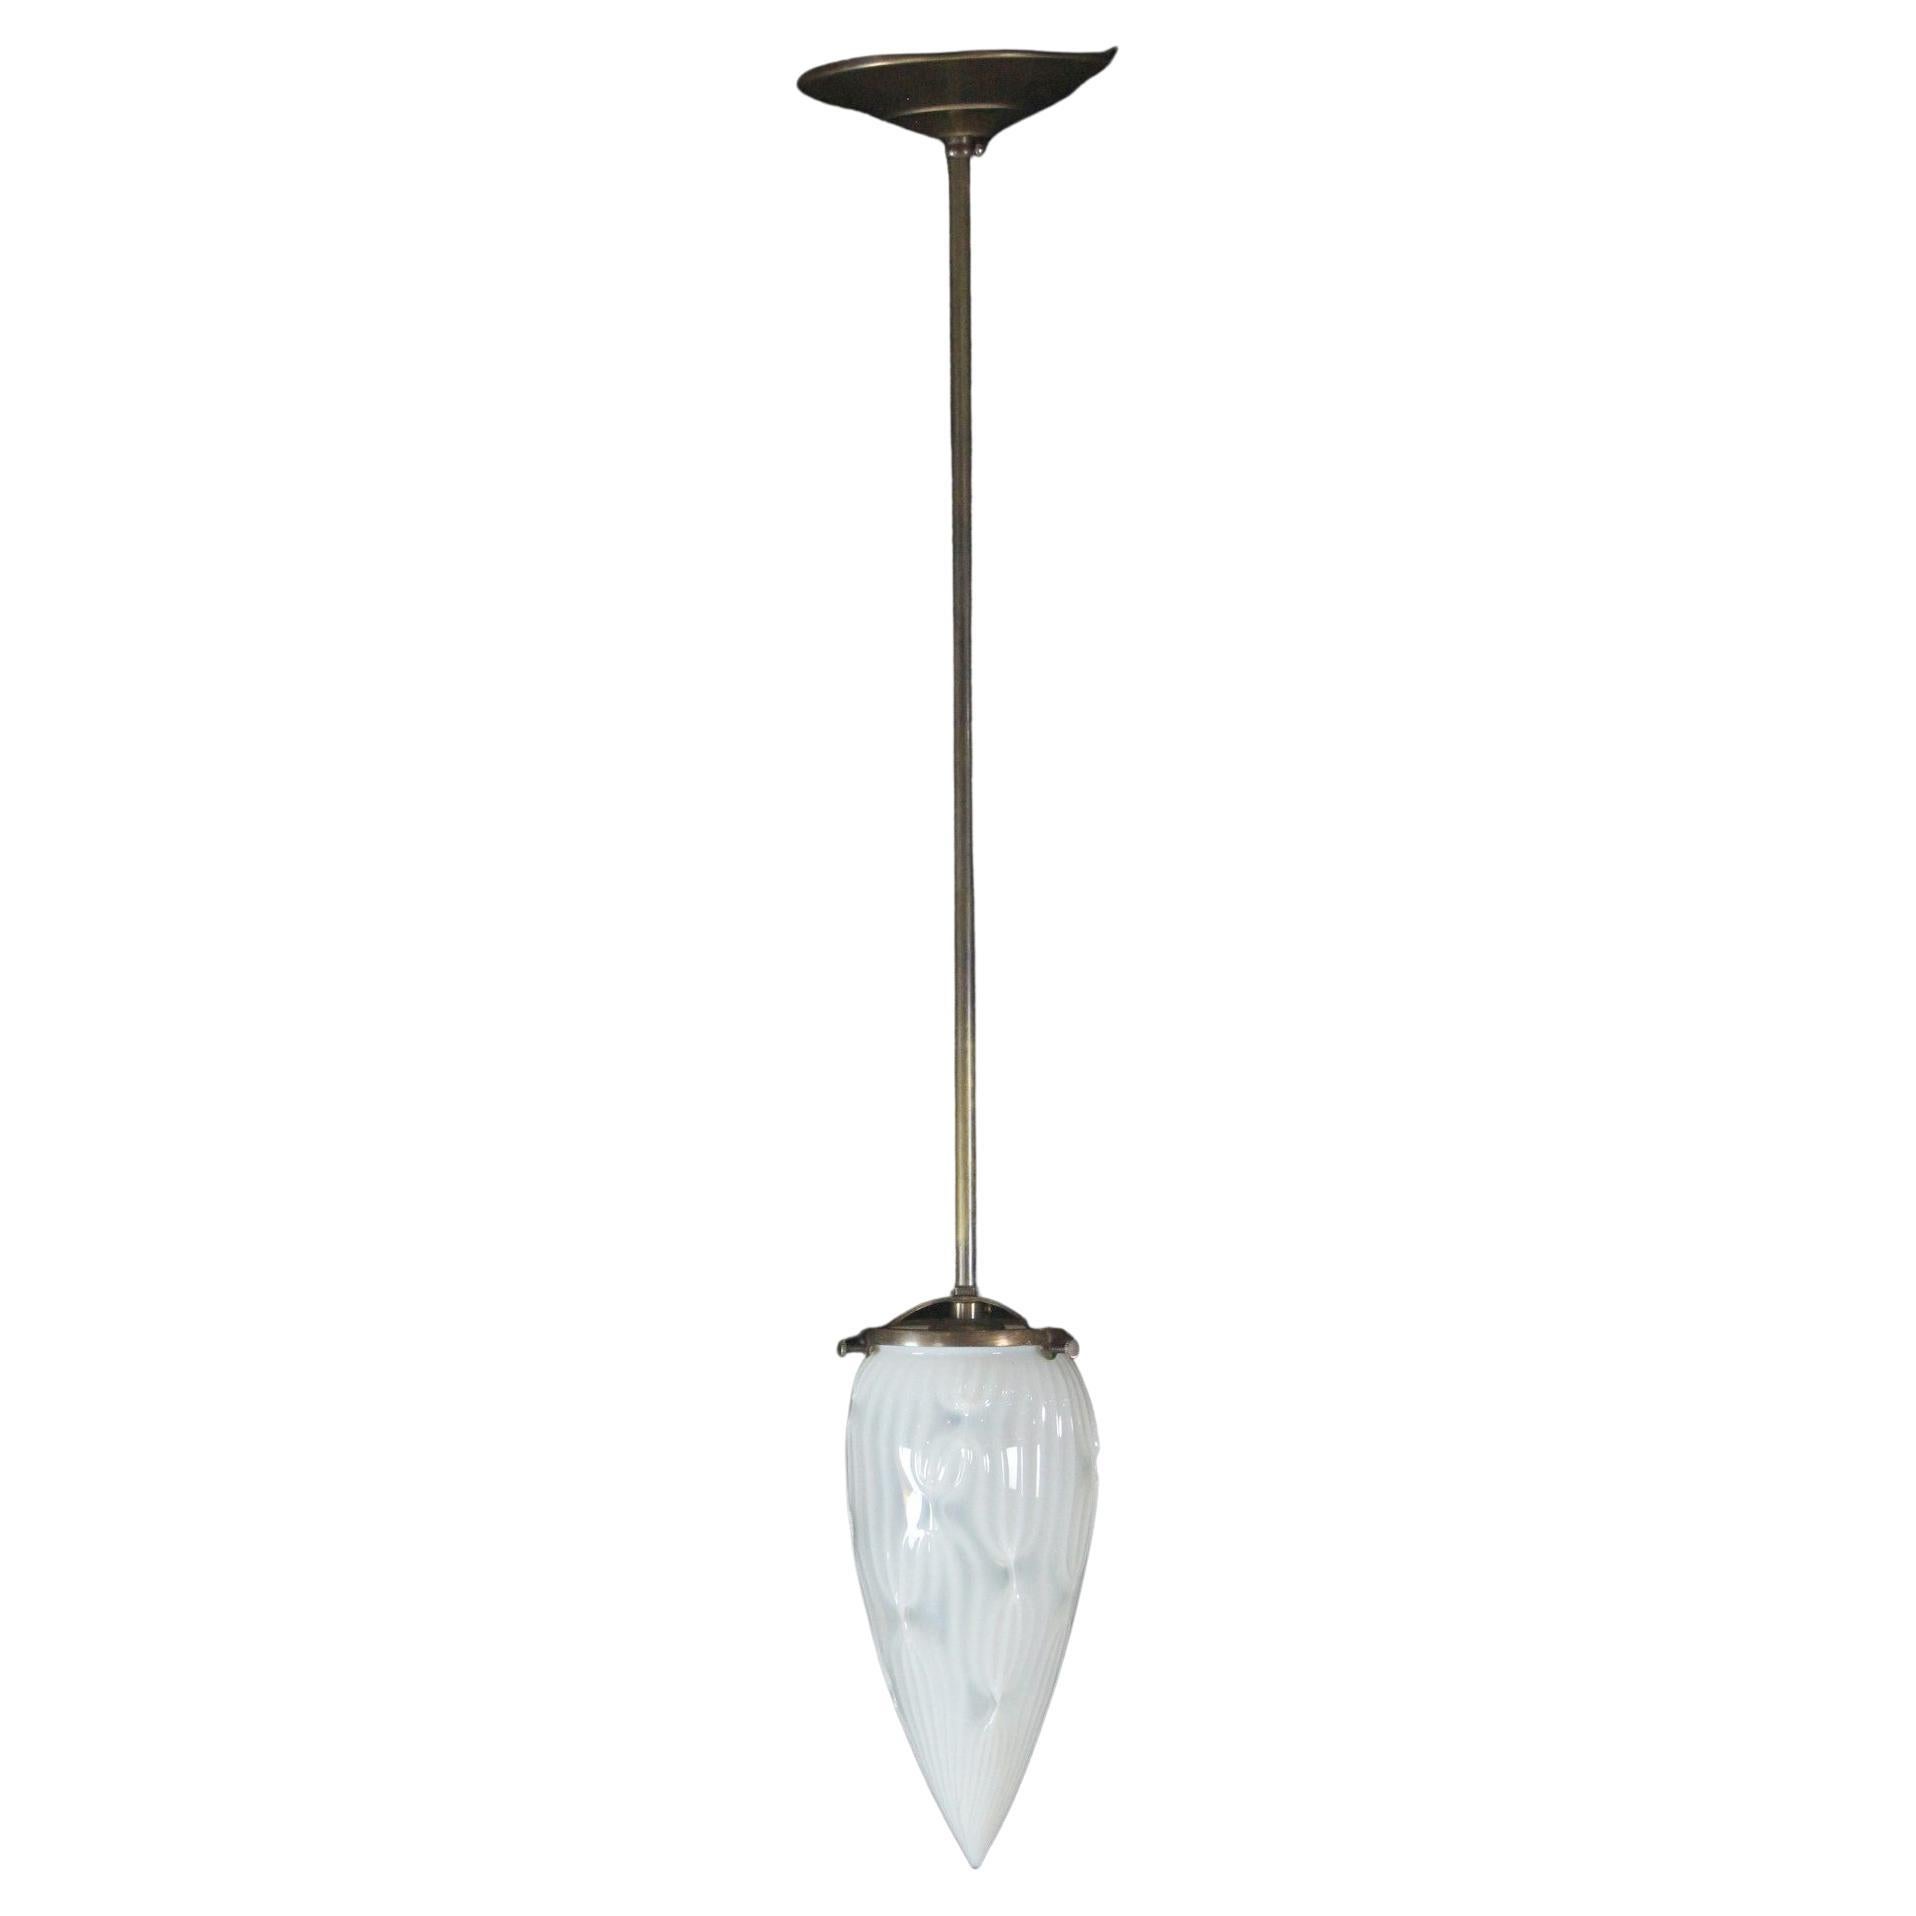 Opalescent Glass Cone Shade Pendant Light Brass Hardware For Sale